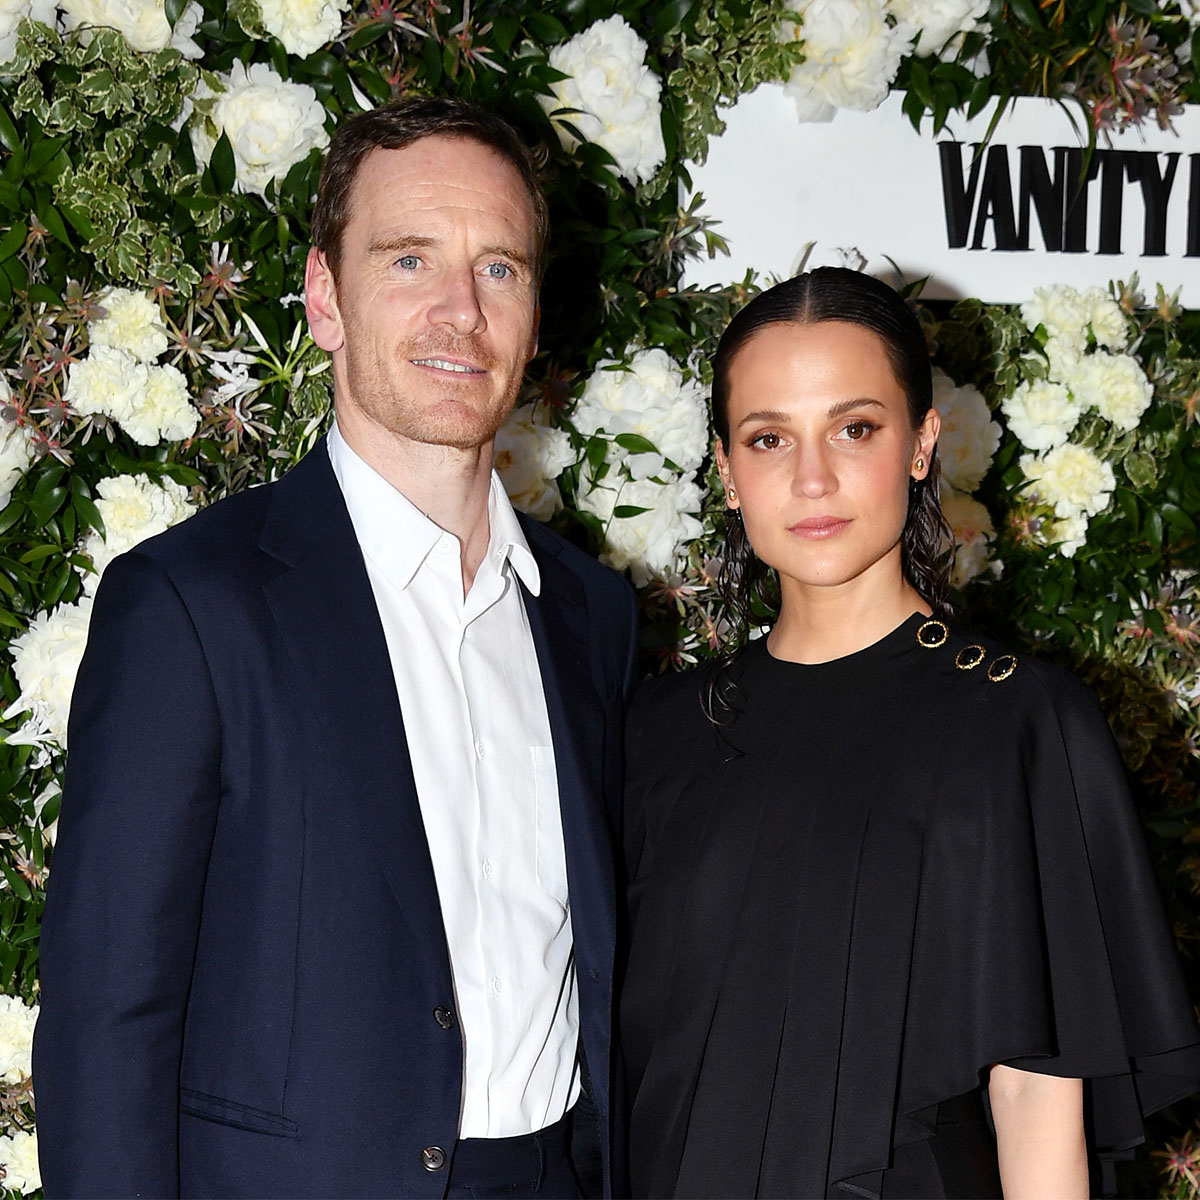 Michael Fassbender steps out to support Oscar-winning wife Alicia Vikander  in rare red carpet appearance at Cannes Film Festival - Irish Star